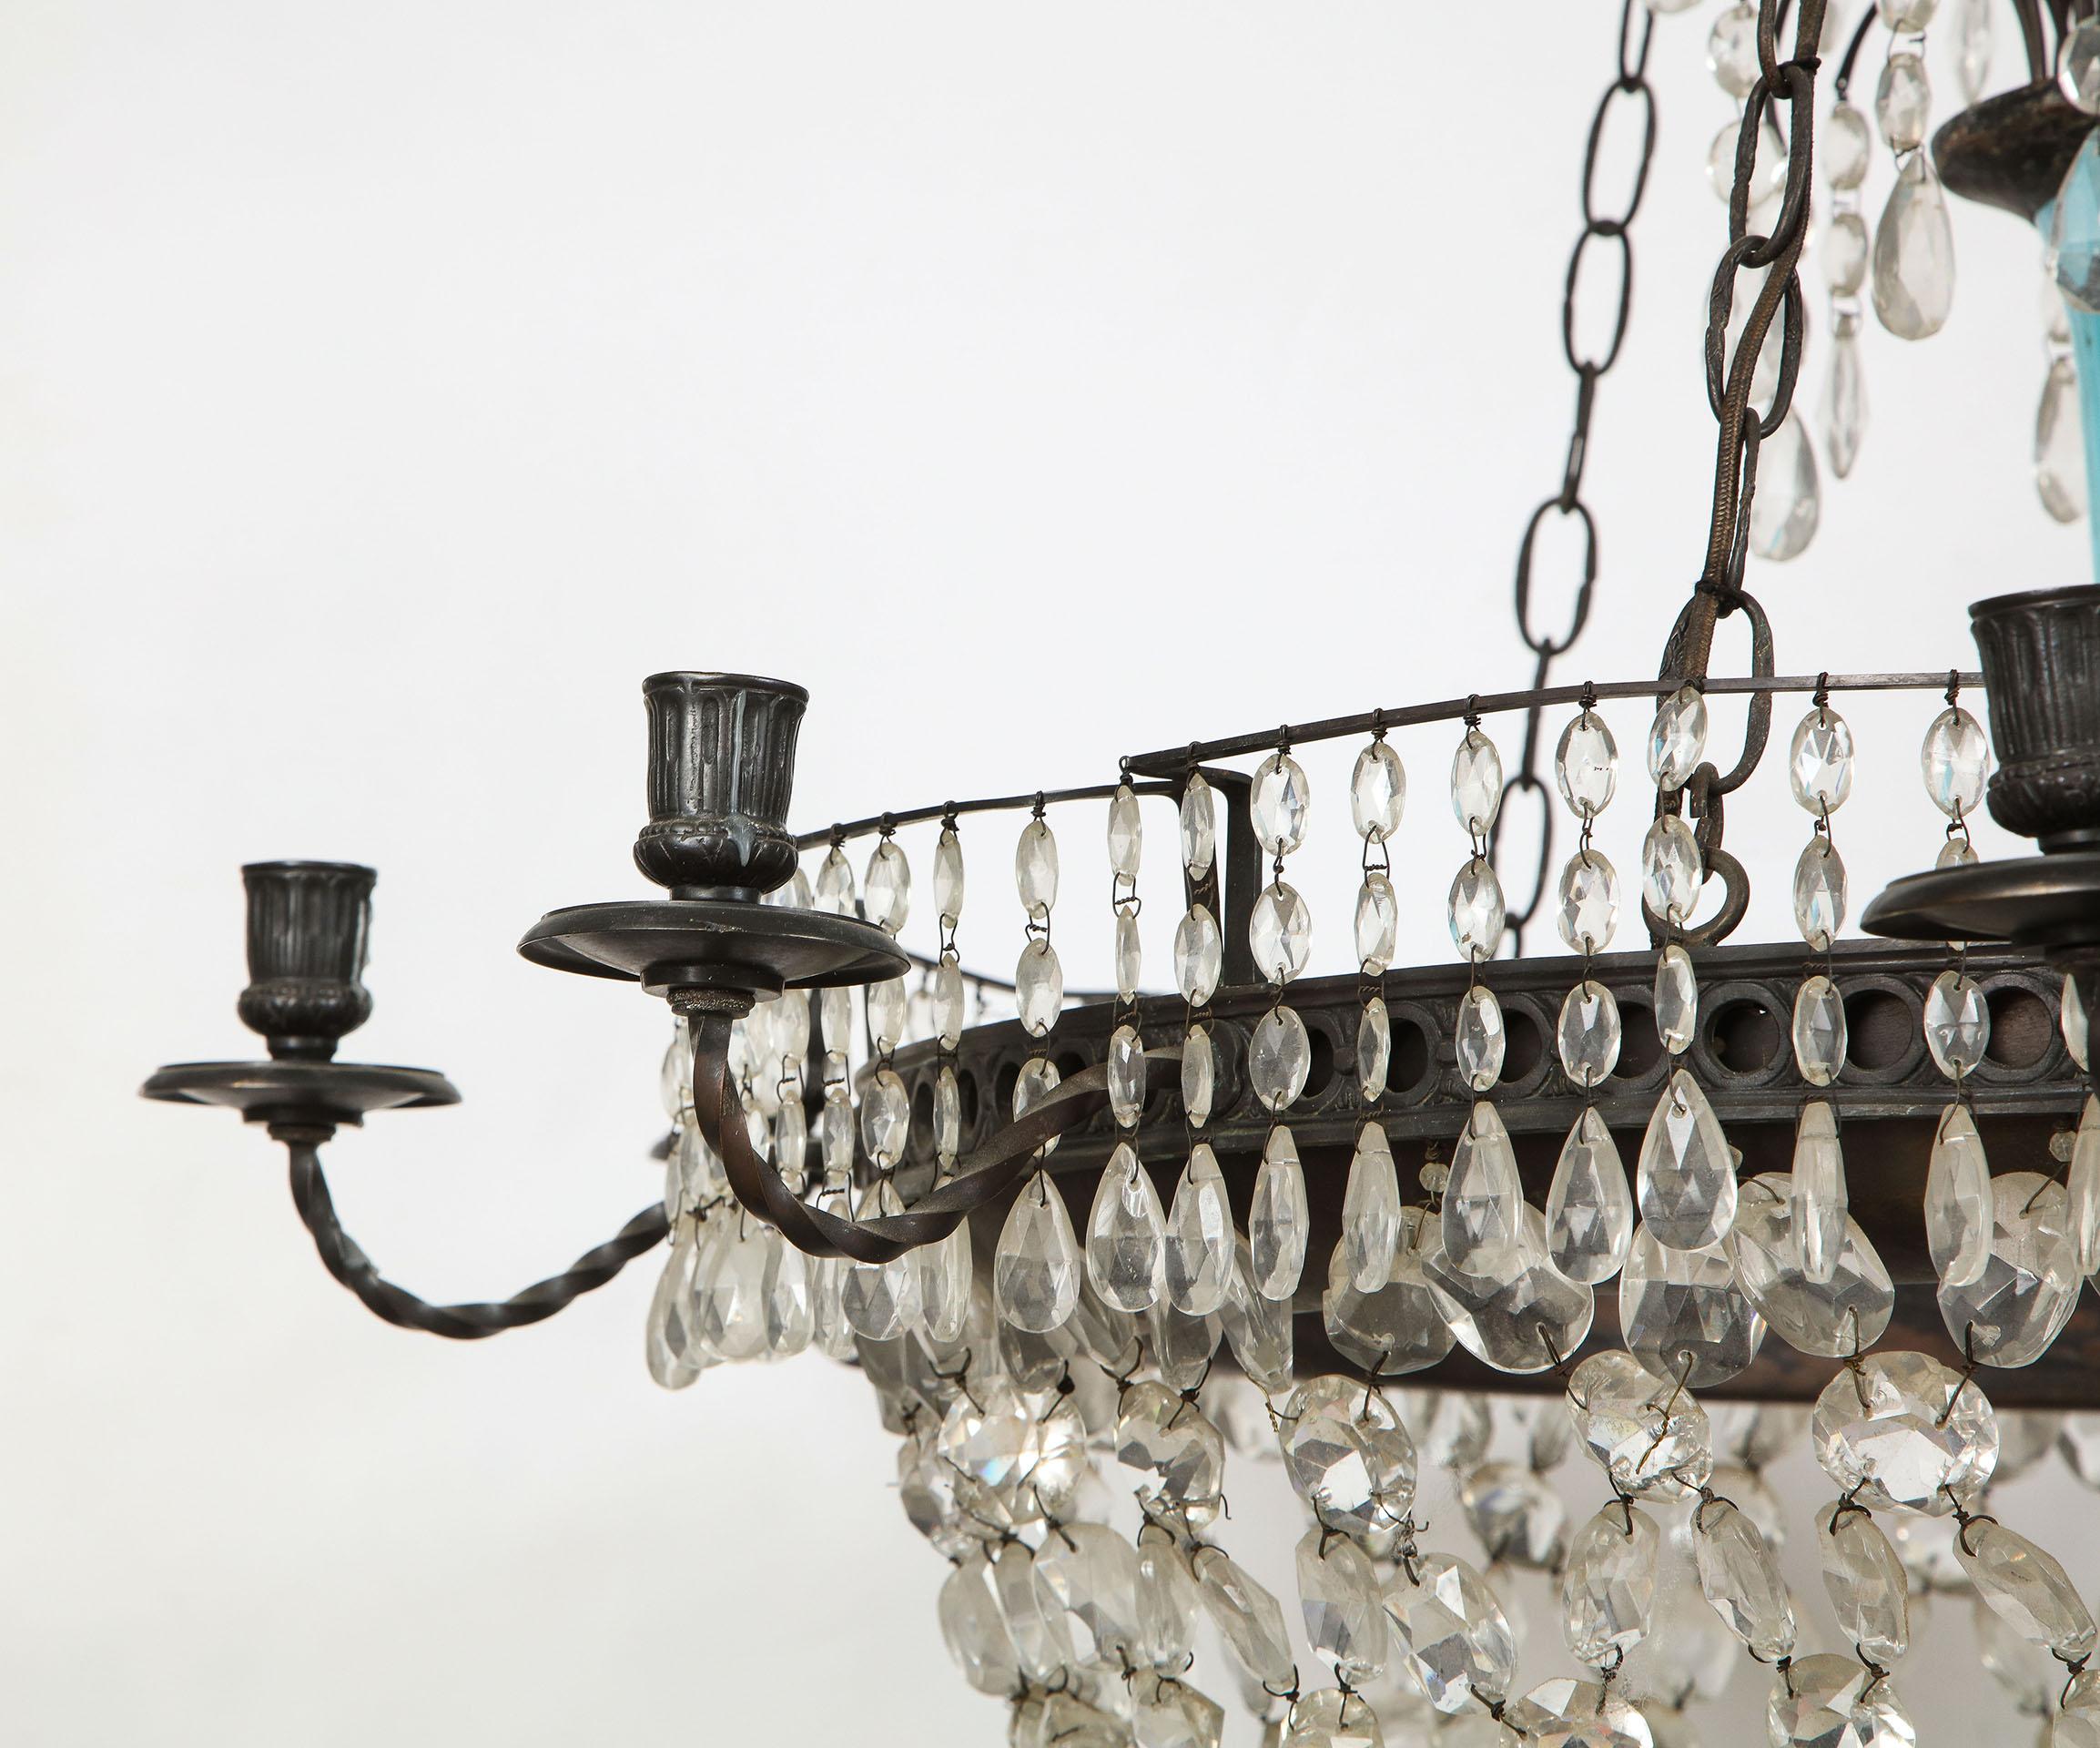 19th Century Crystal Chandelier